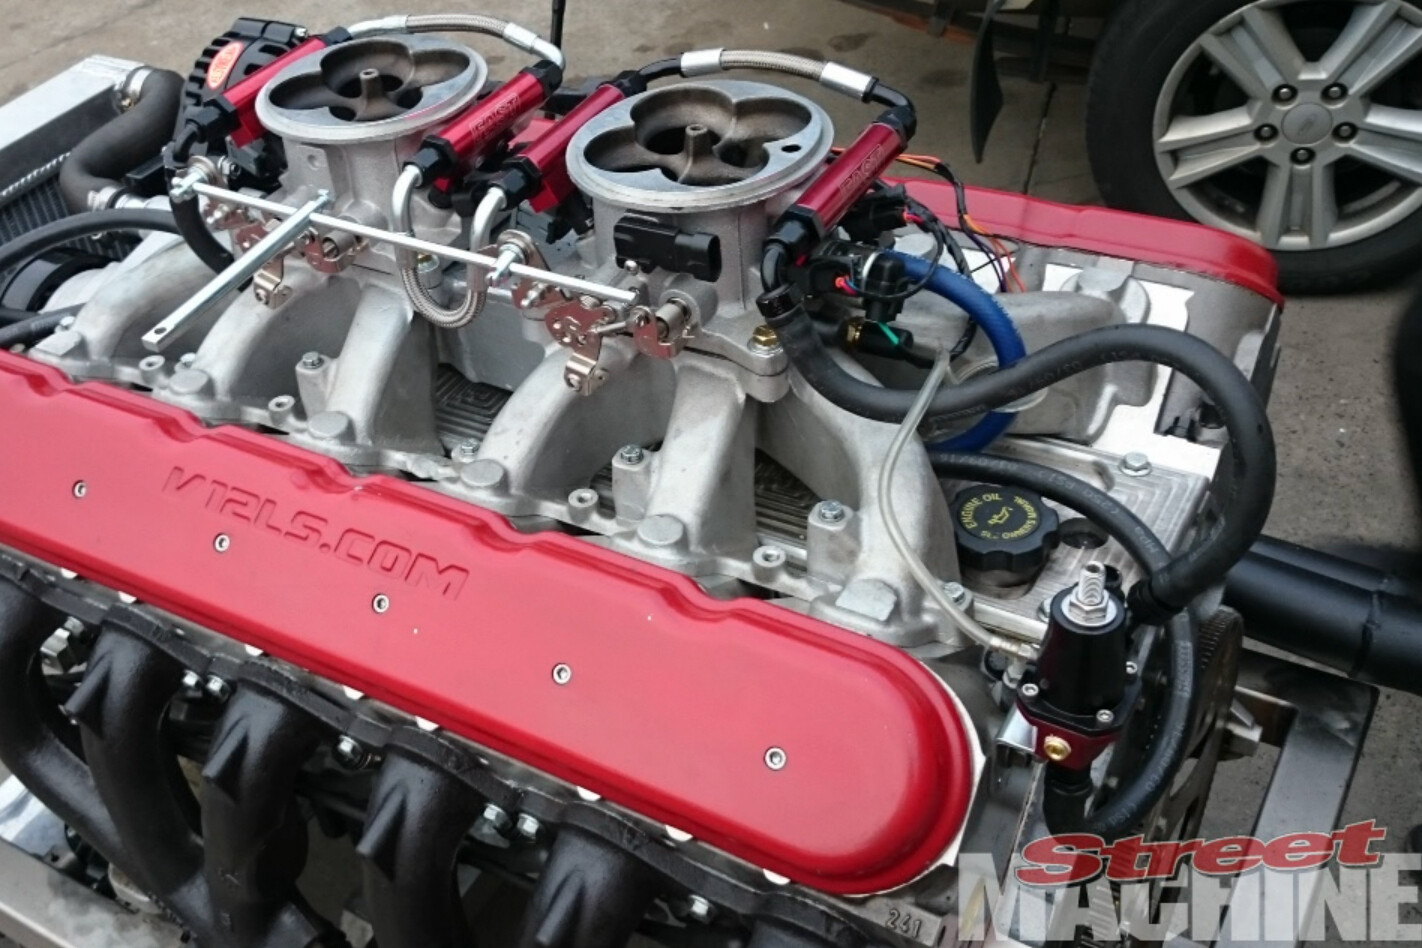 They built a cool V12 using two LS1 engines